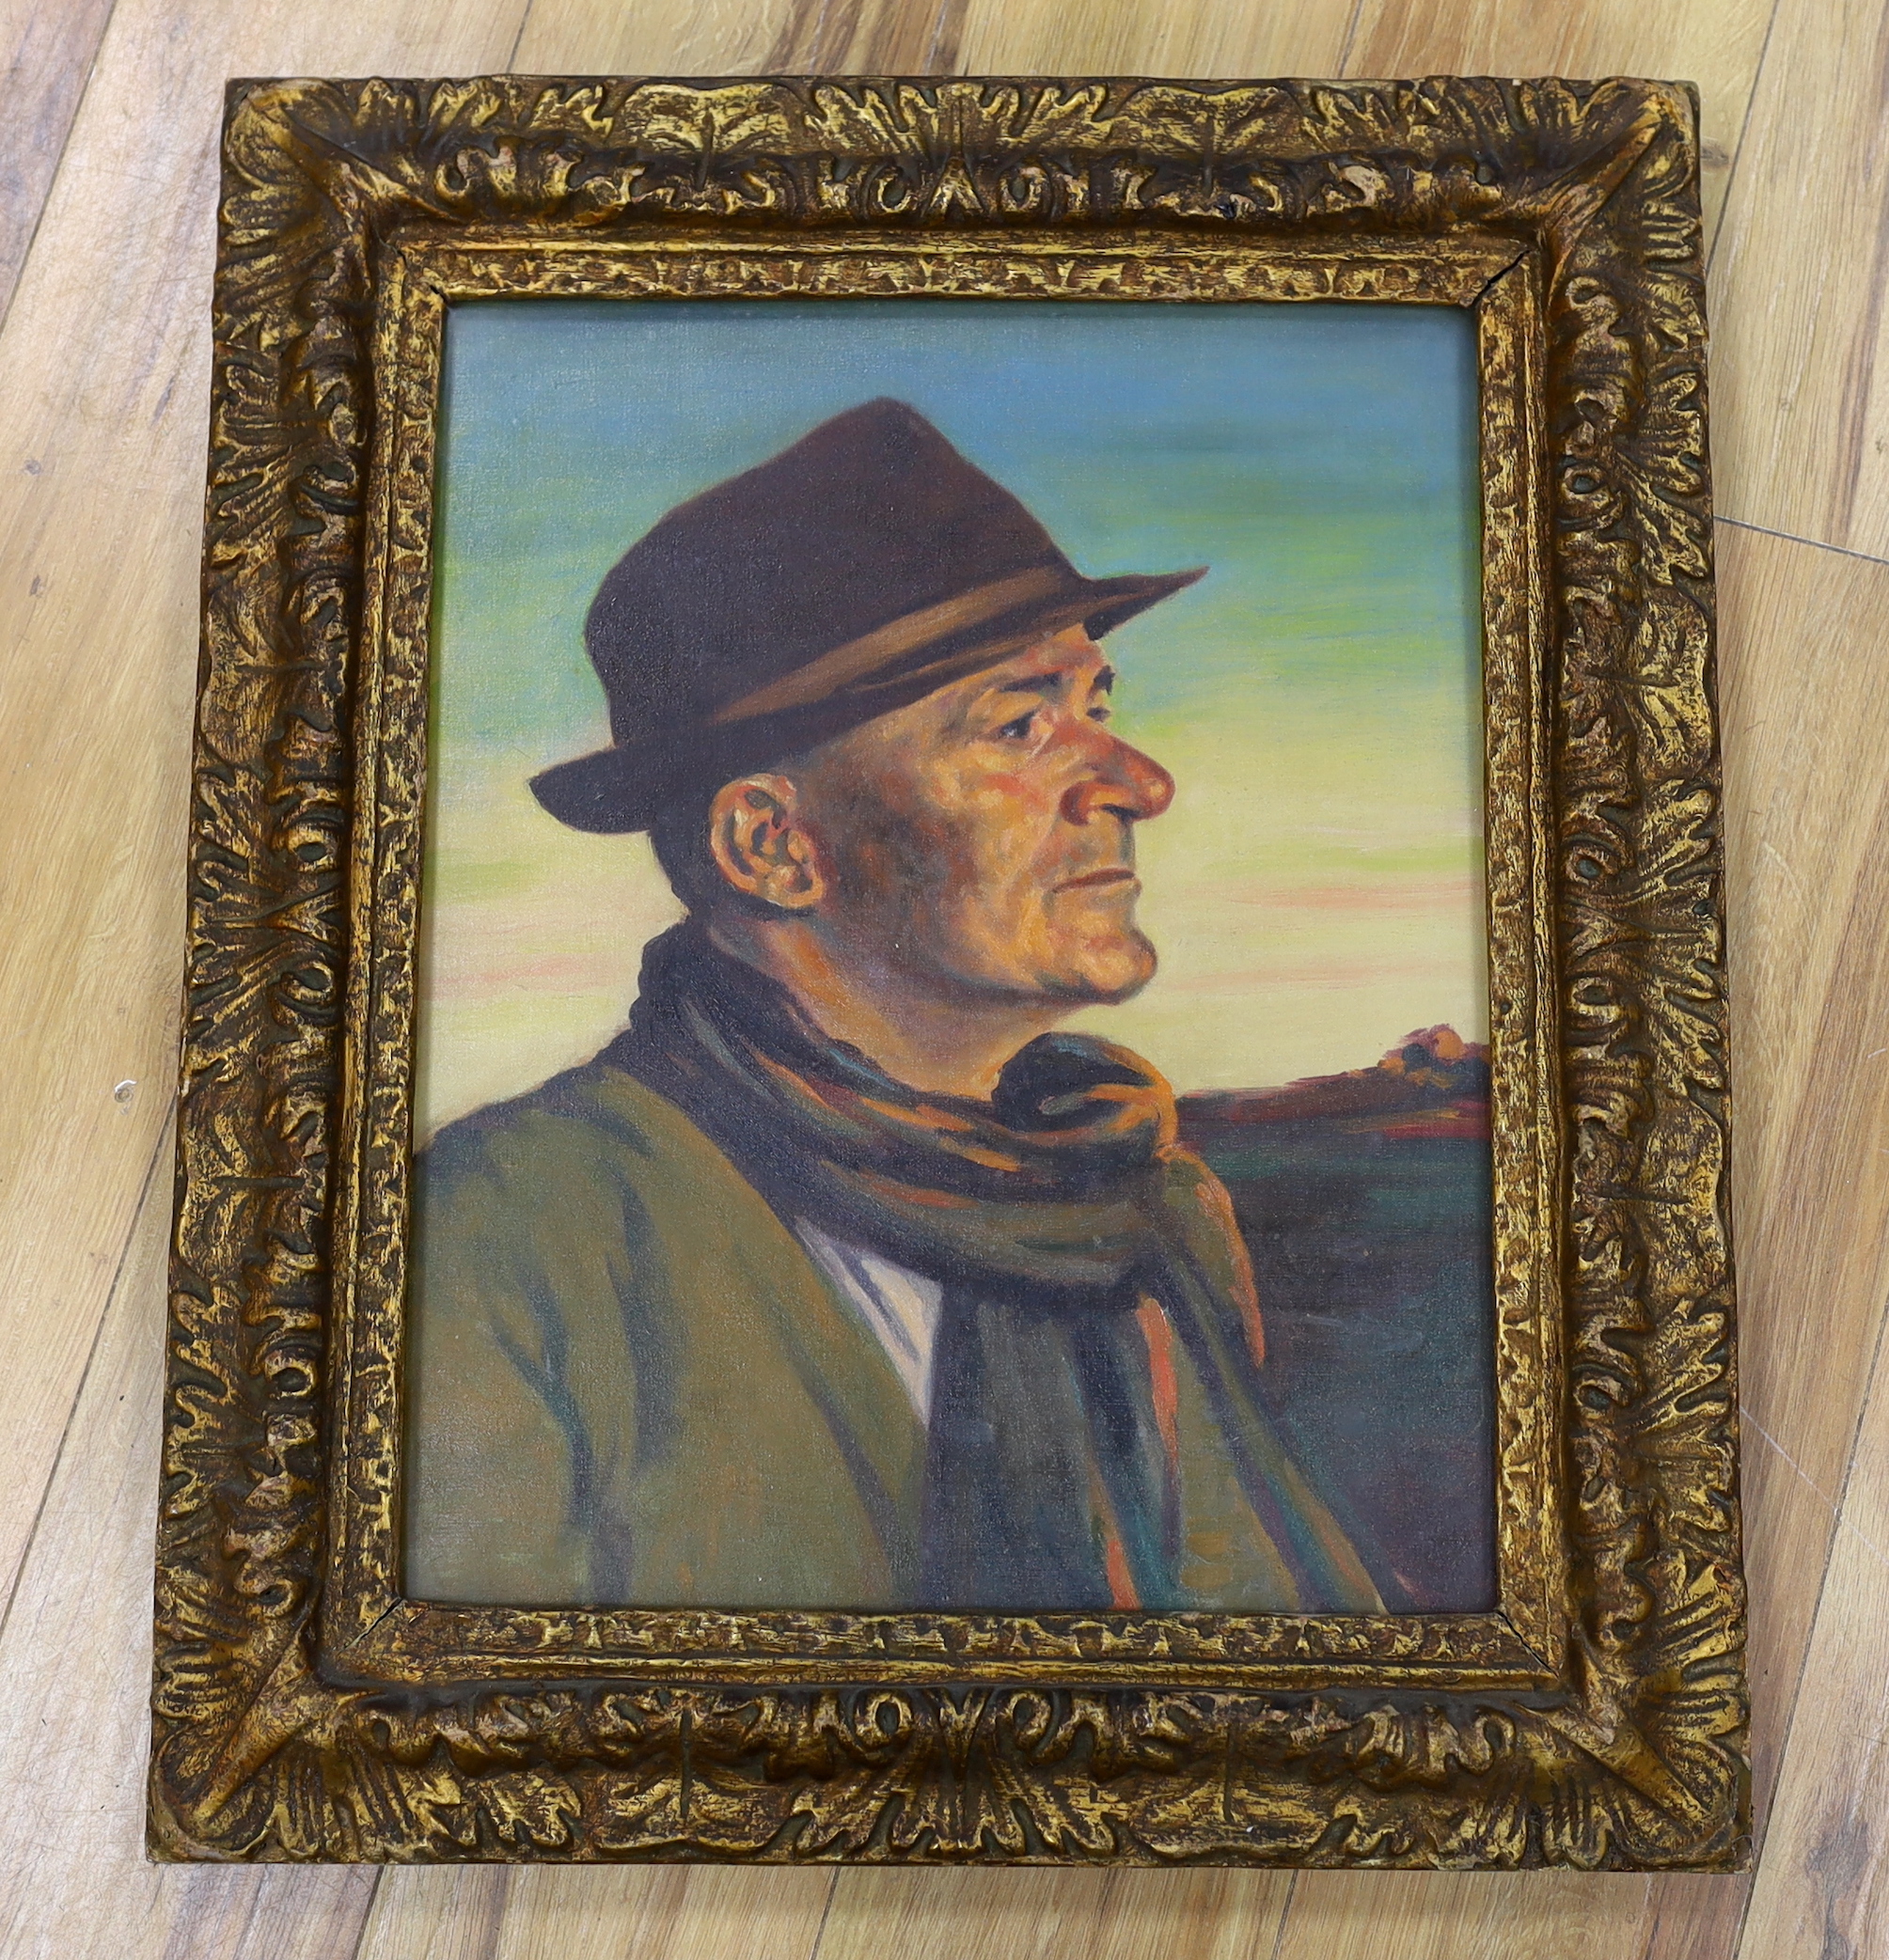 20th century English School, oil on canvas, Portrait of a gentleman, inscribed verso H. Russell, 49 x 39cm